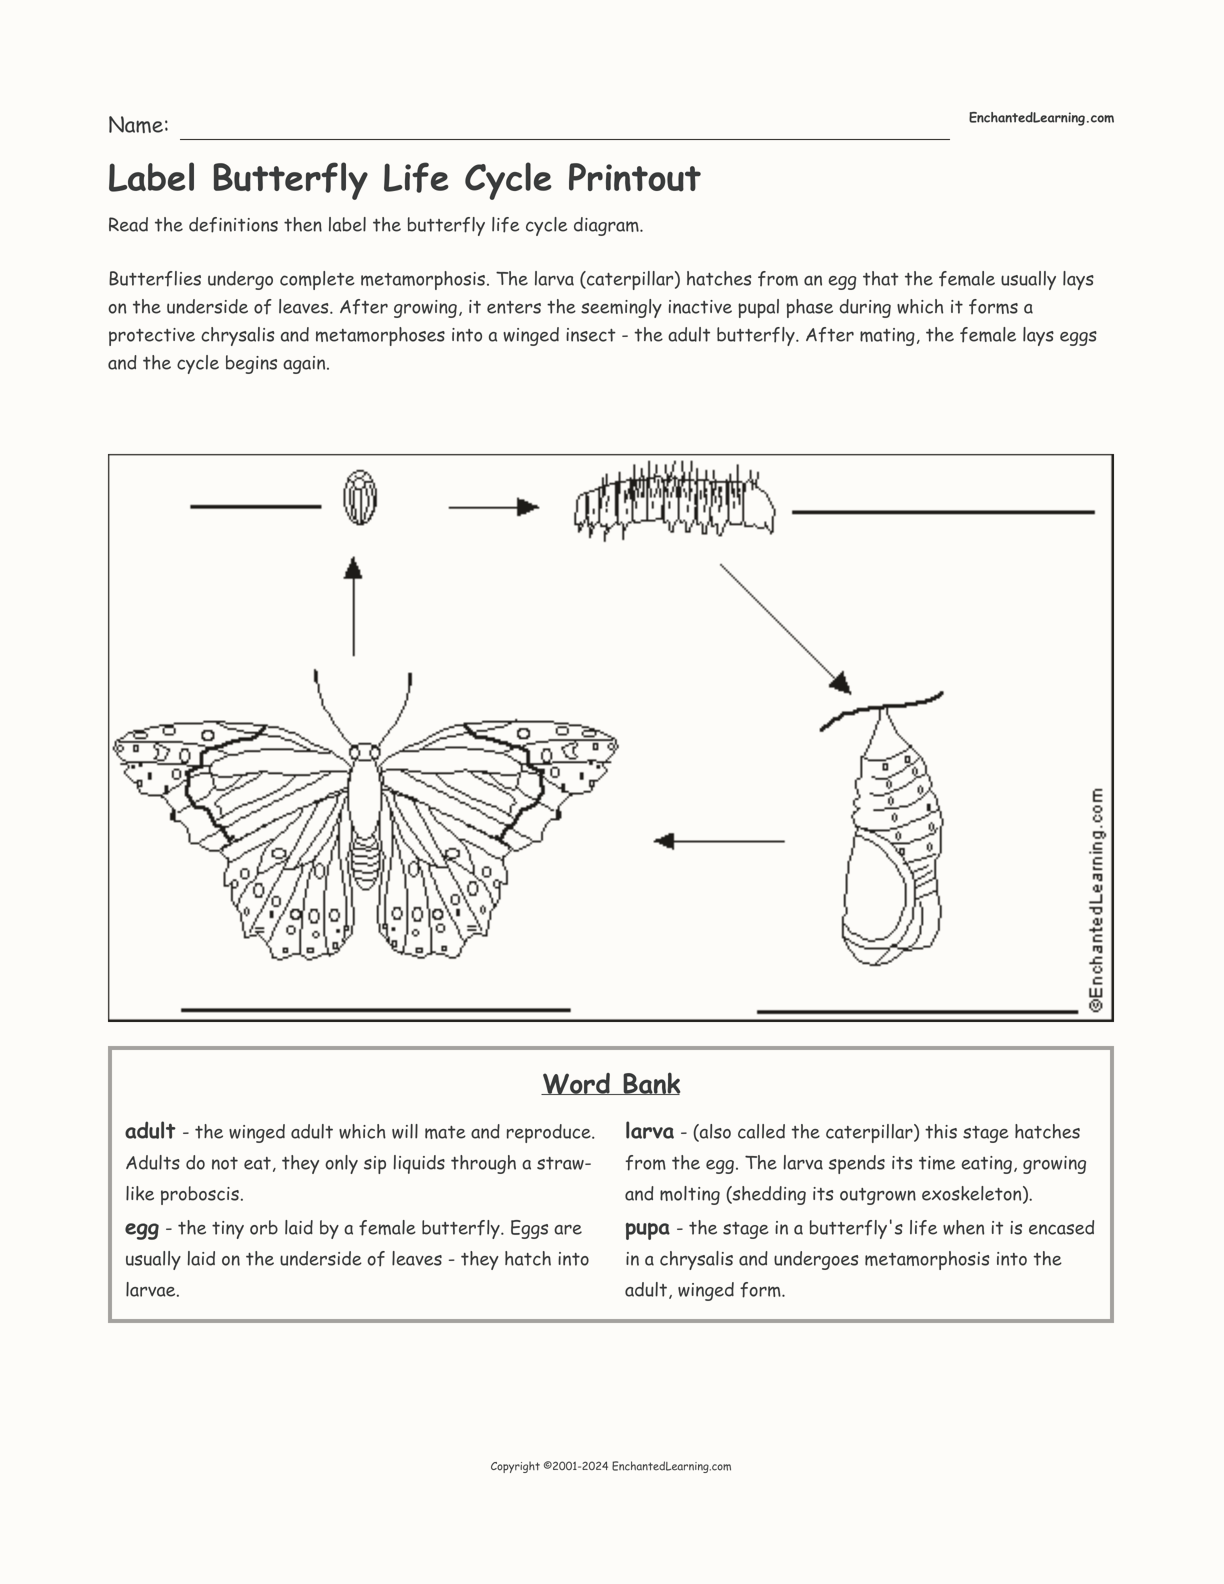 label-butterfly-life-cycle-printout-enchanted-learning